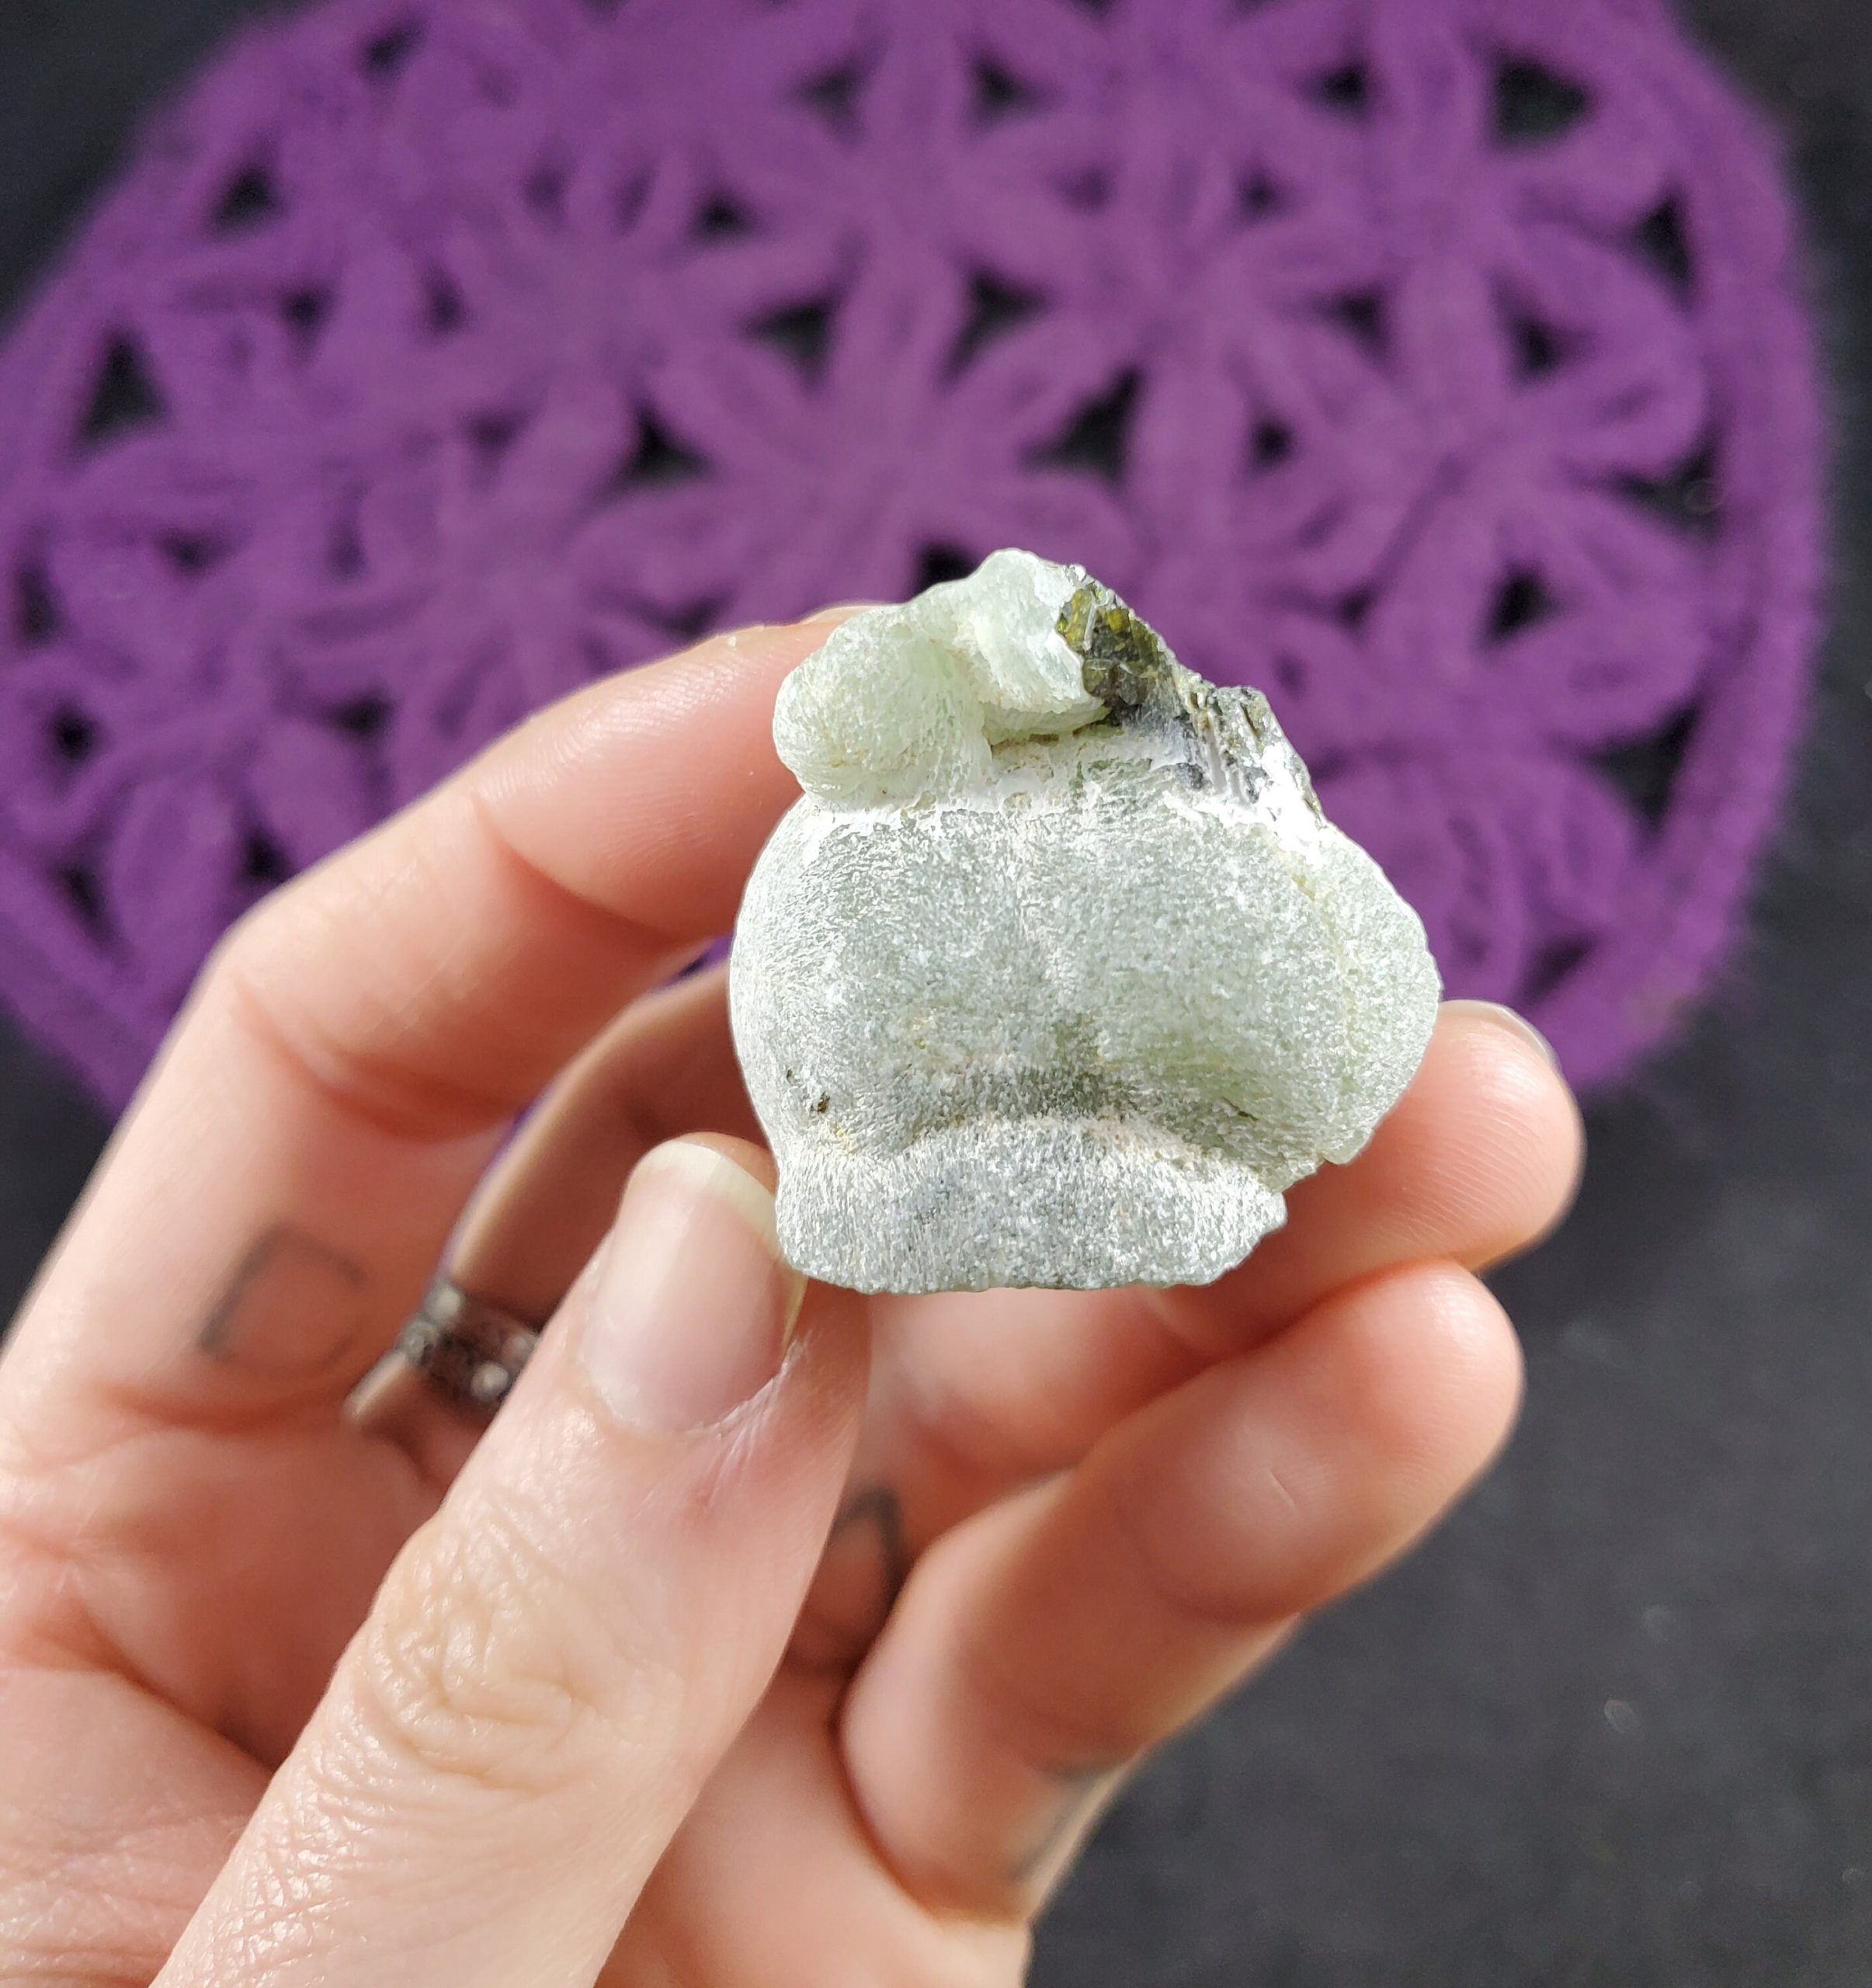 Raw Natural Prehnite With Epidote Botryoidal Bubble Cluster Crystal Balls Stones Crystals Rough Specimen Mali Africa